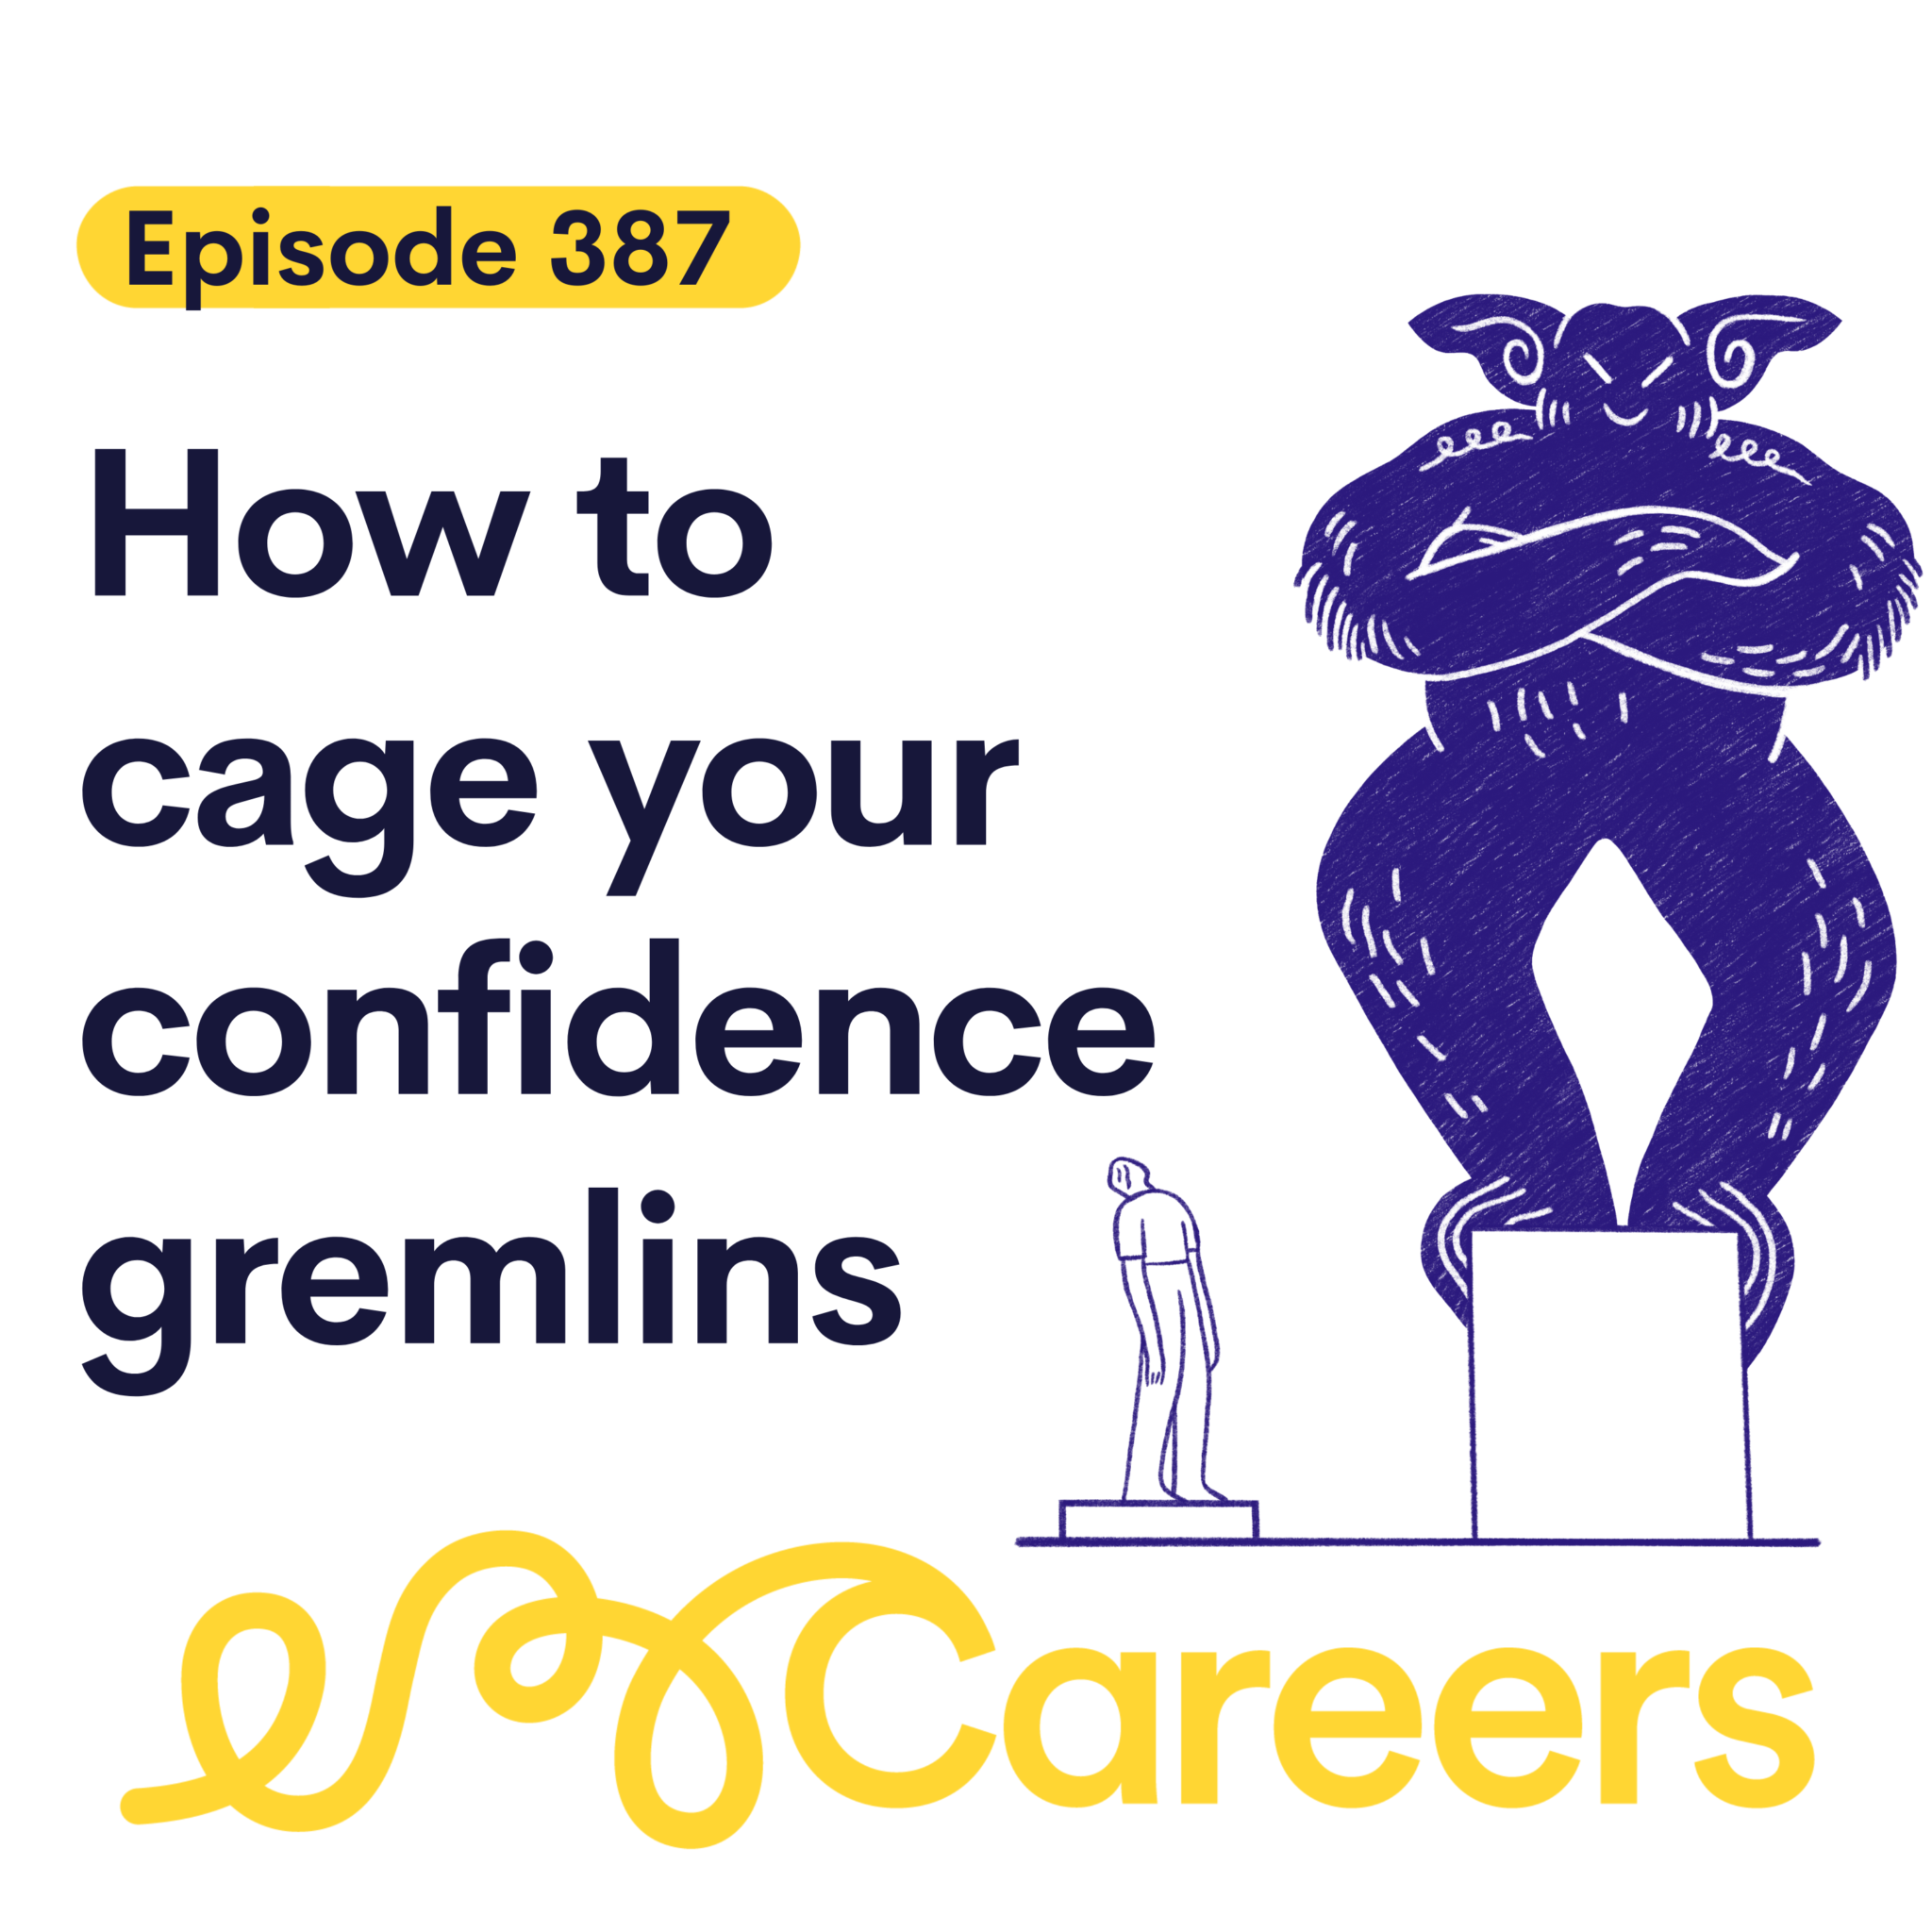 Learn how to cage your confidence gremlins